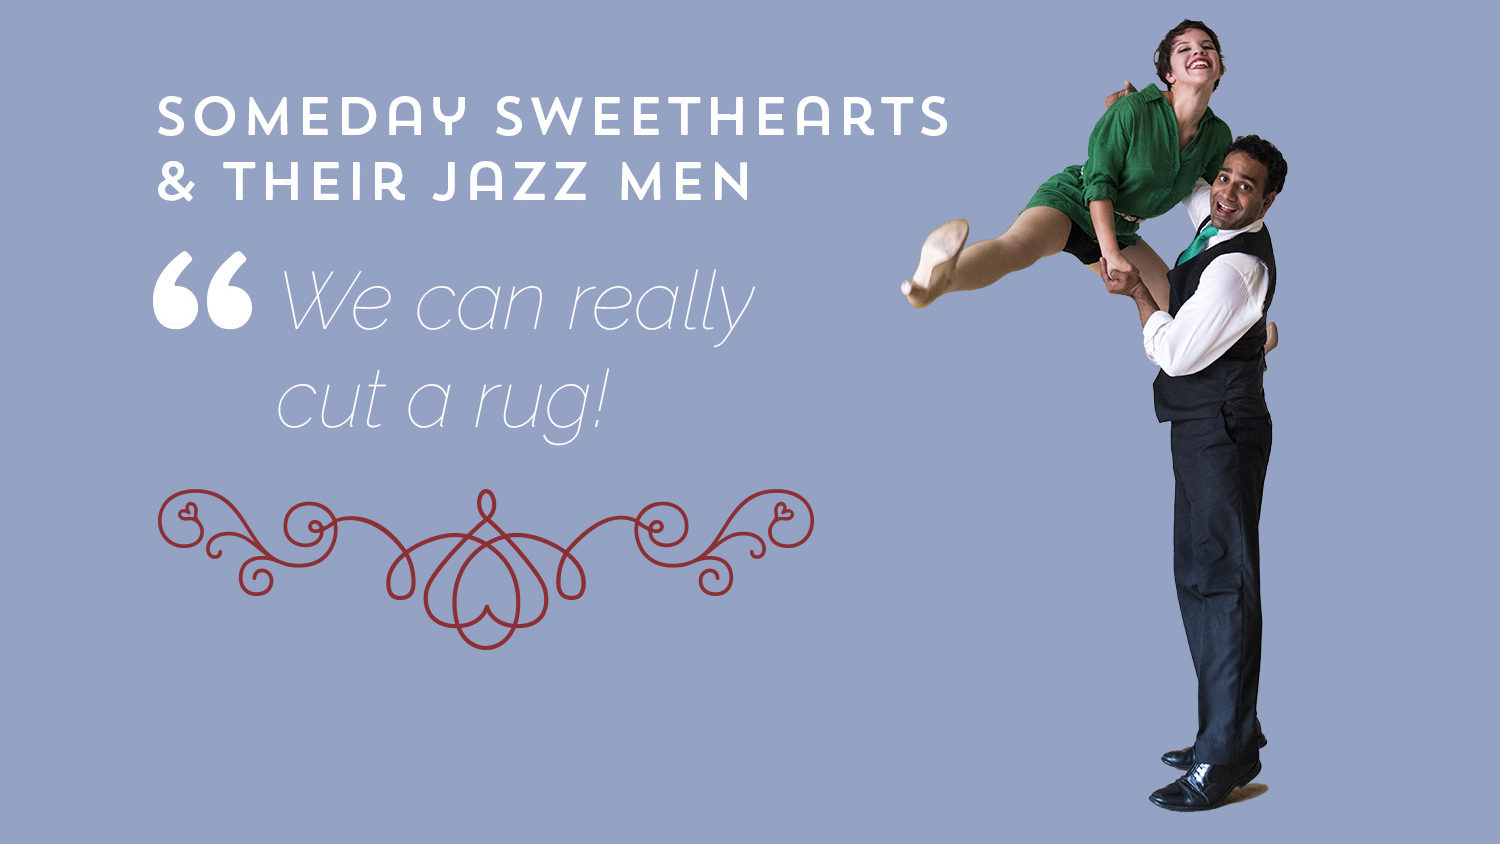 Someday Sweethearts, Cut a Rug Facebook promotion